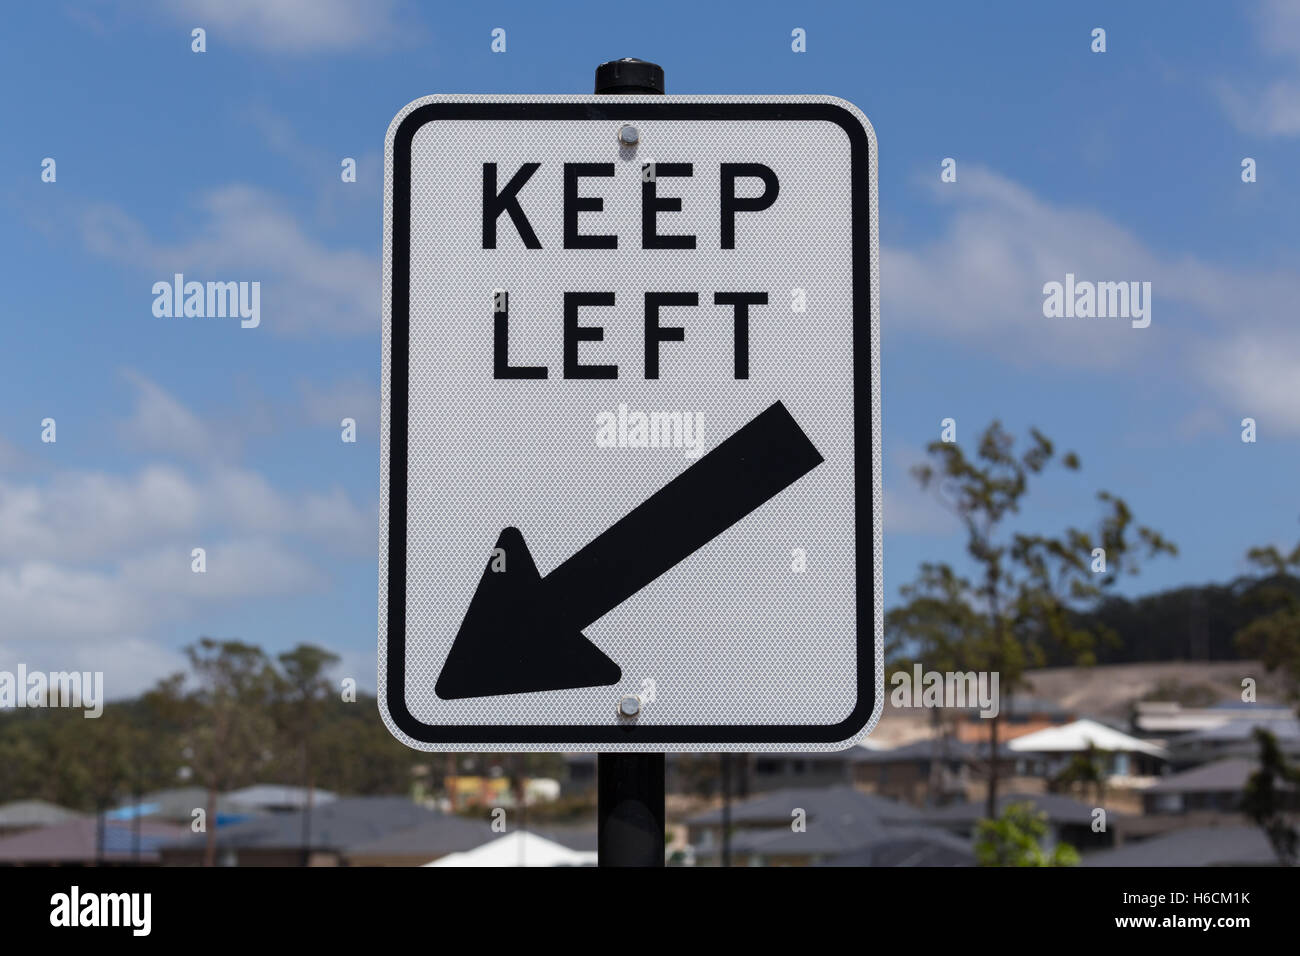 Keep Left Road SIgn, Stock Photo